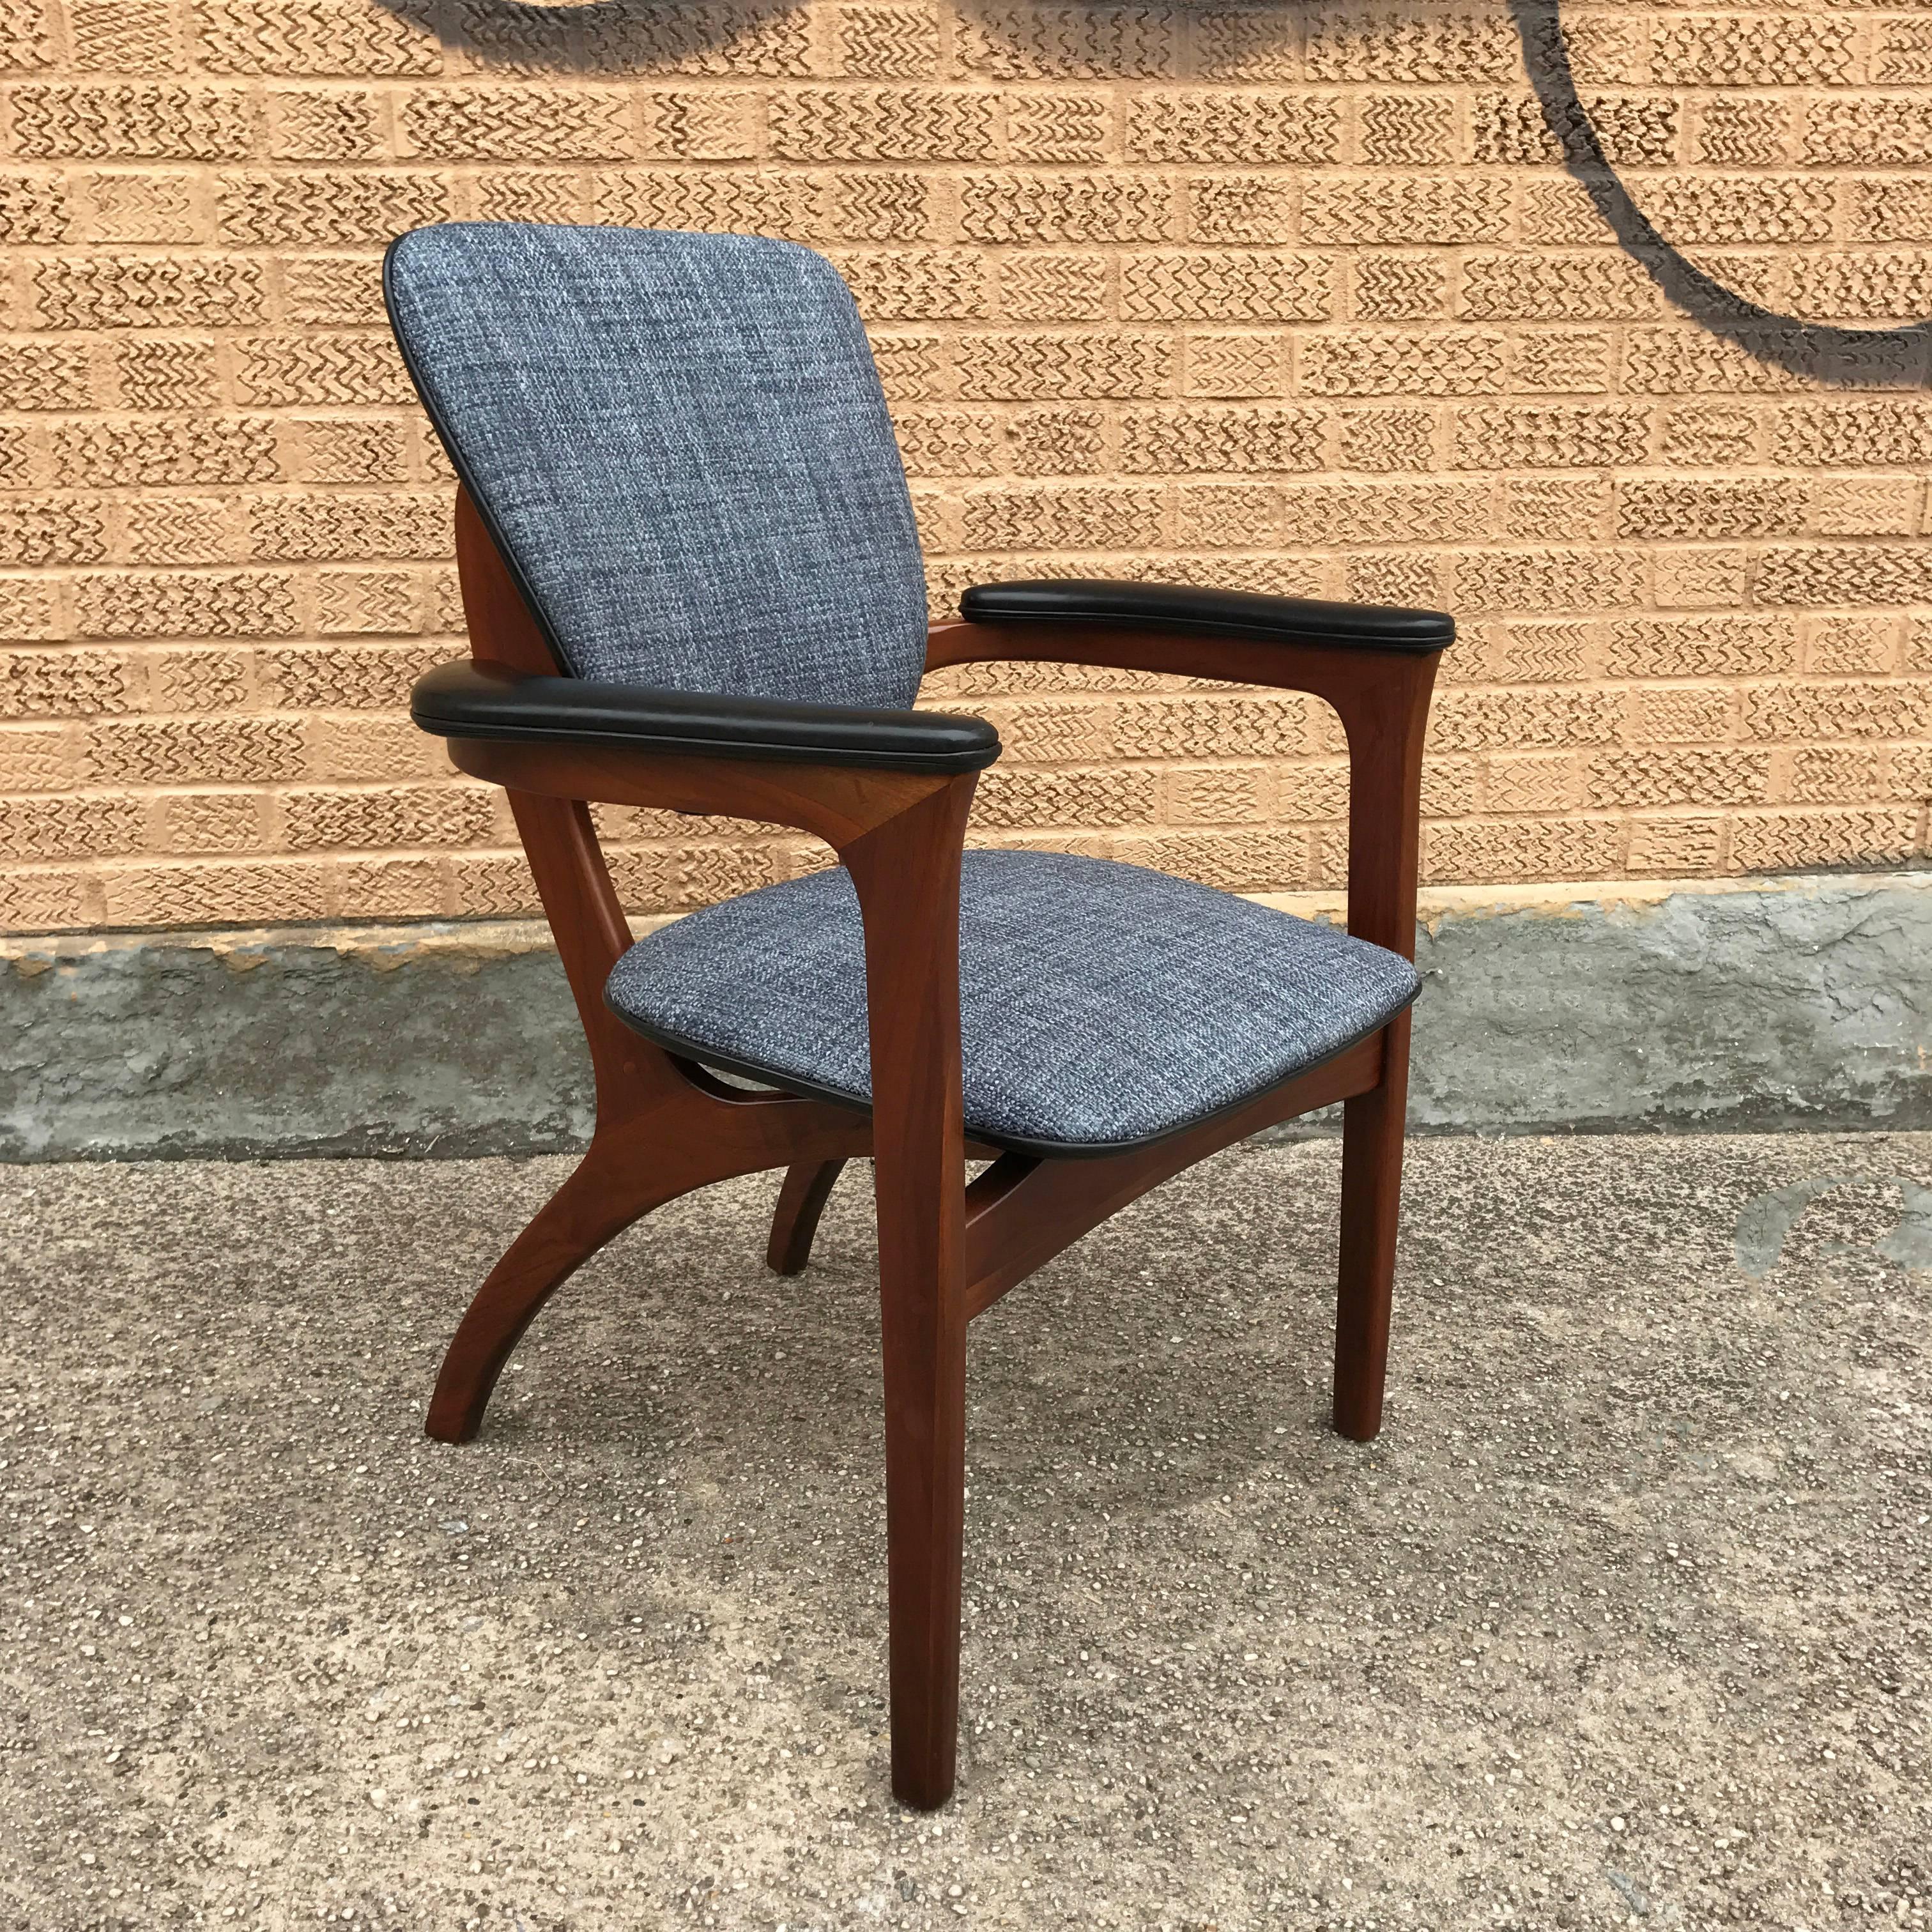 Rare, Mid-Century Modern, sculptural, walnut armchair designed by Adrian Pearsall is fully restored featuring blue tweed upholstered seat and back with black leather armrests. A handsome chair from all angles.